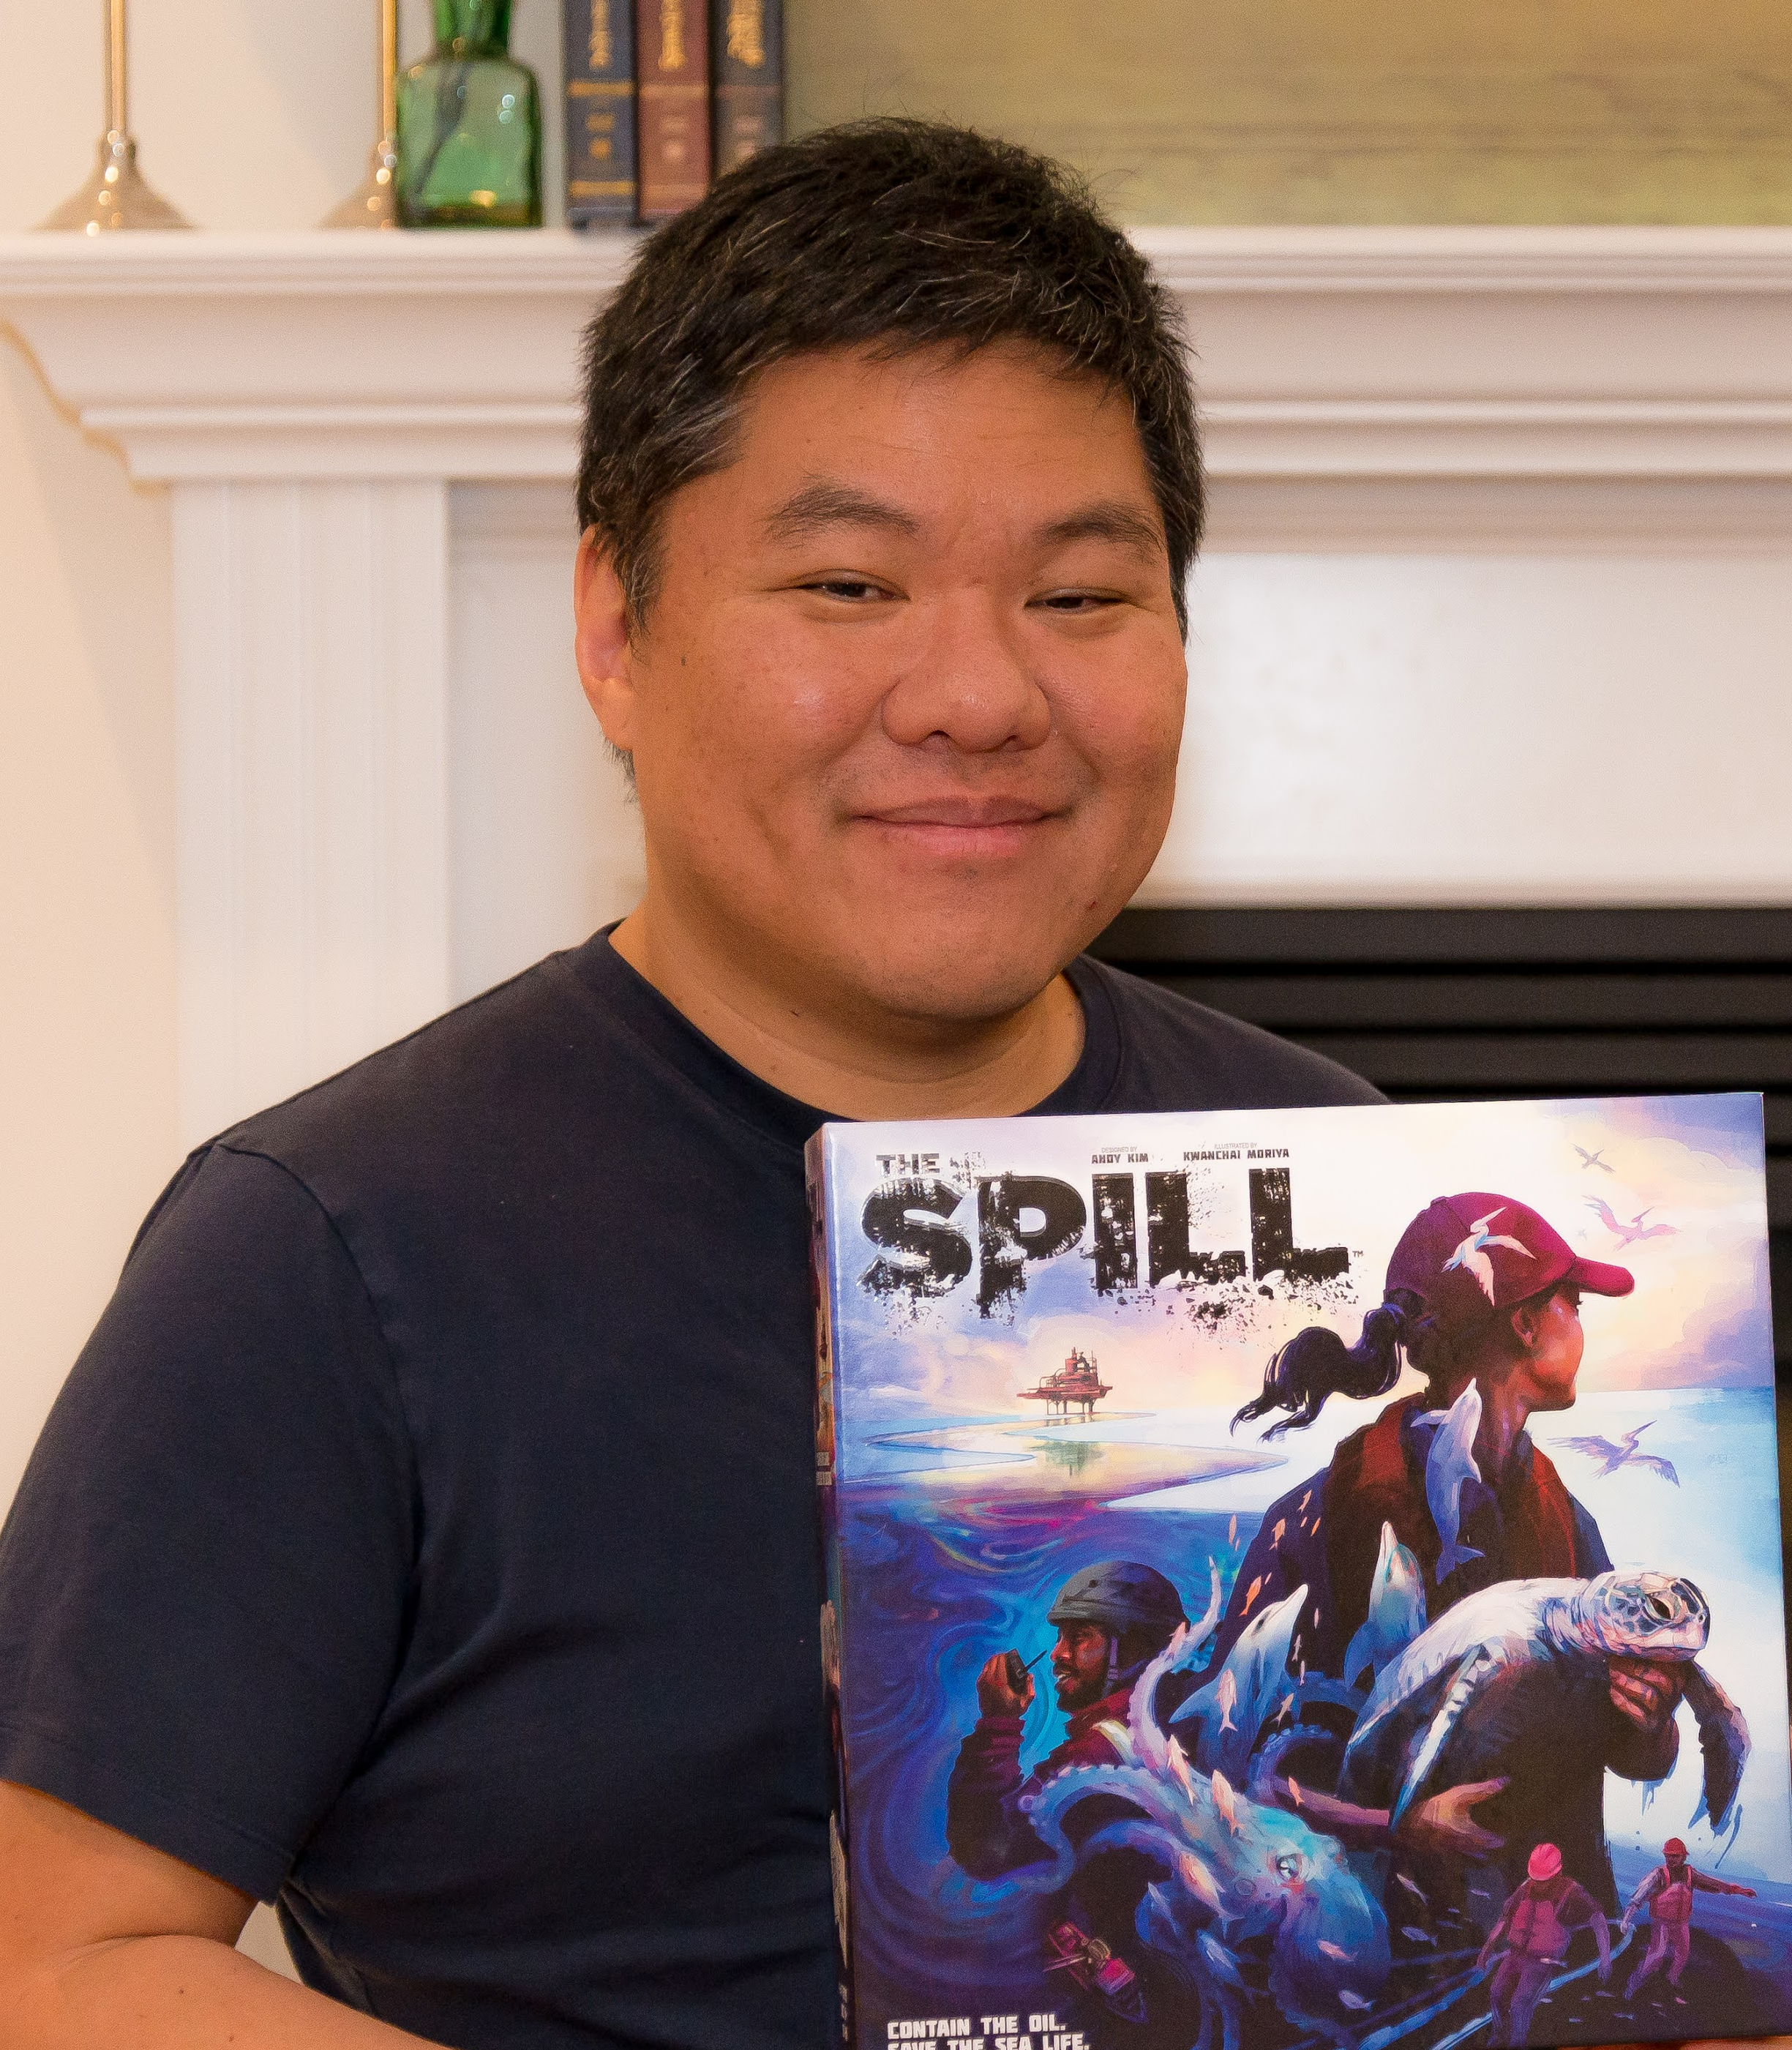 Andy Kim smiling at the camera holding a copy of his game The Spill